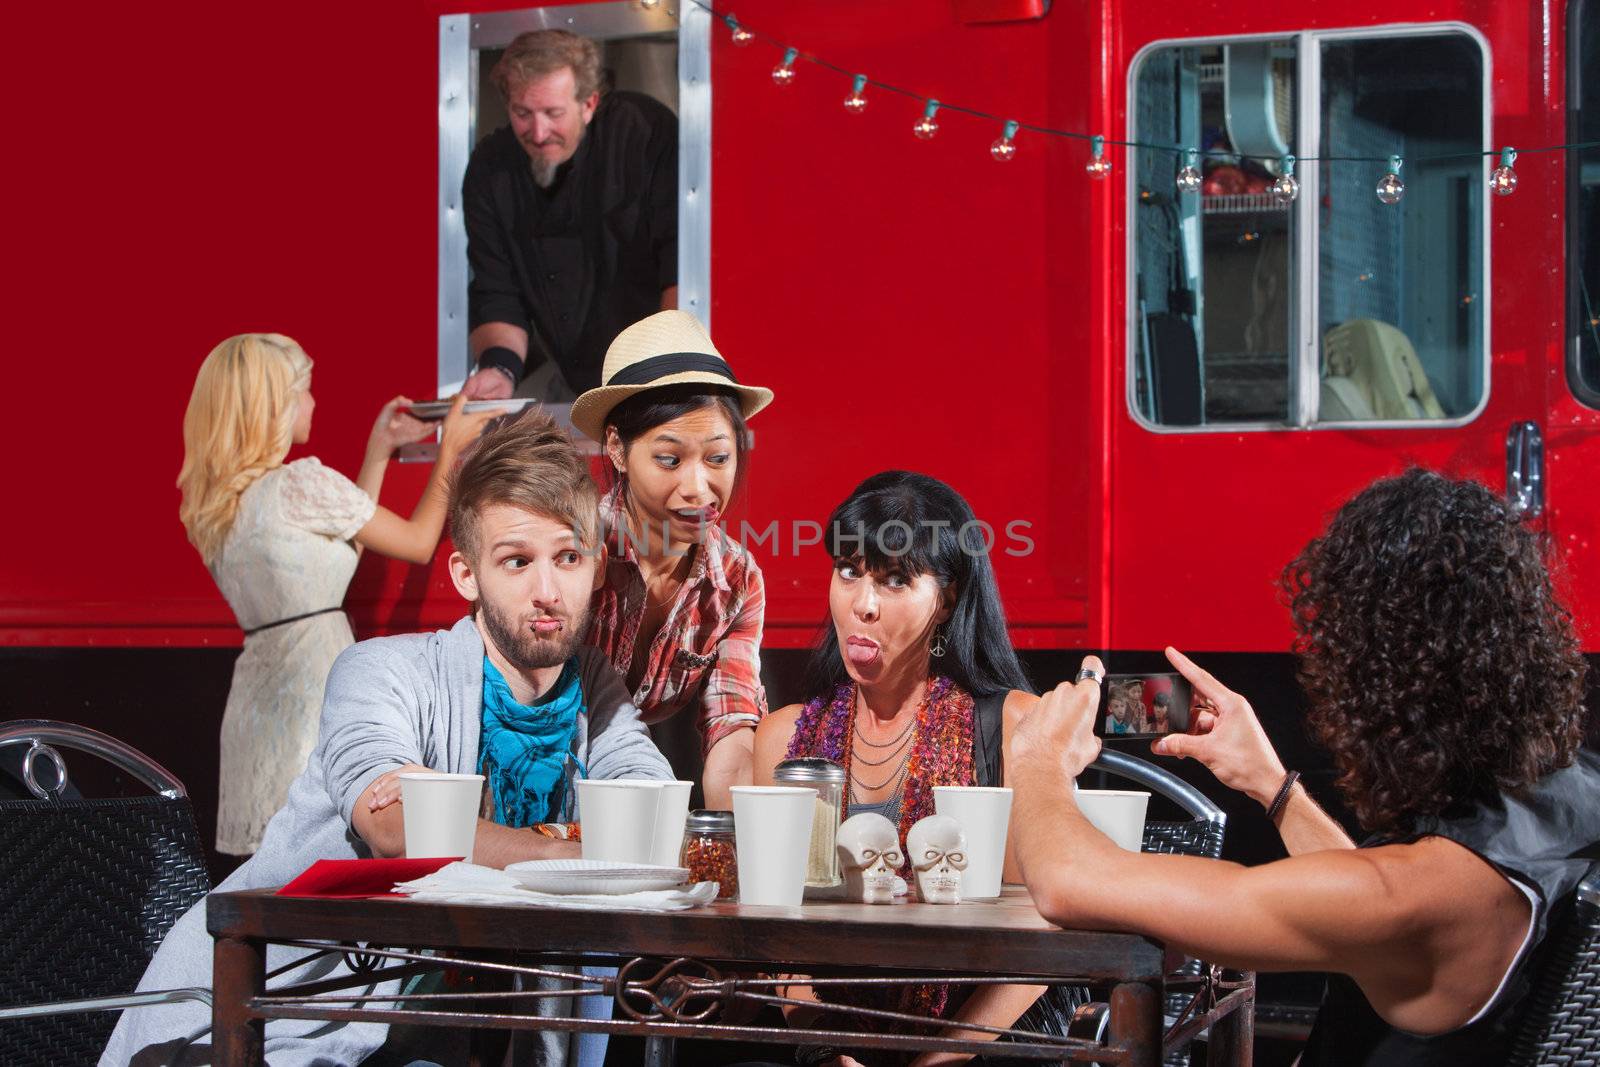 Friends sticking out tongues for photo near food truck